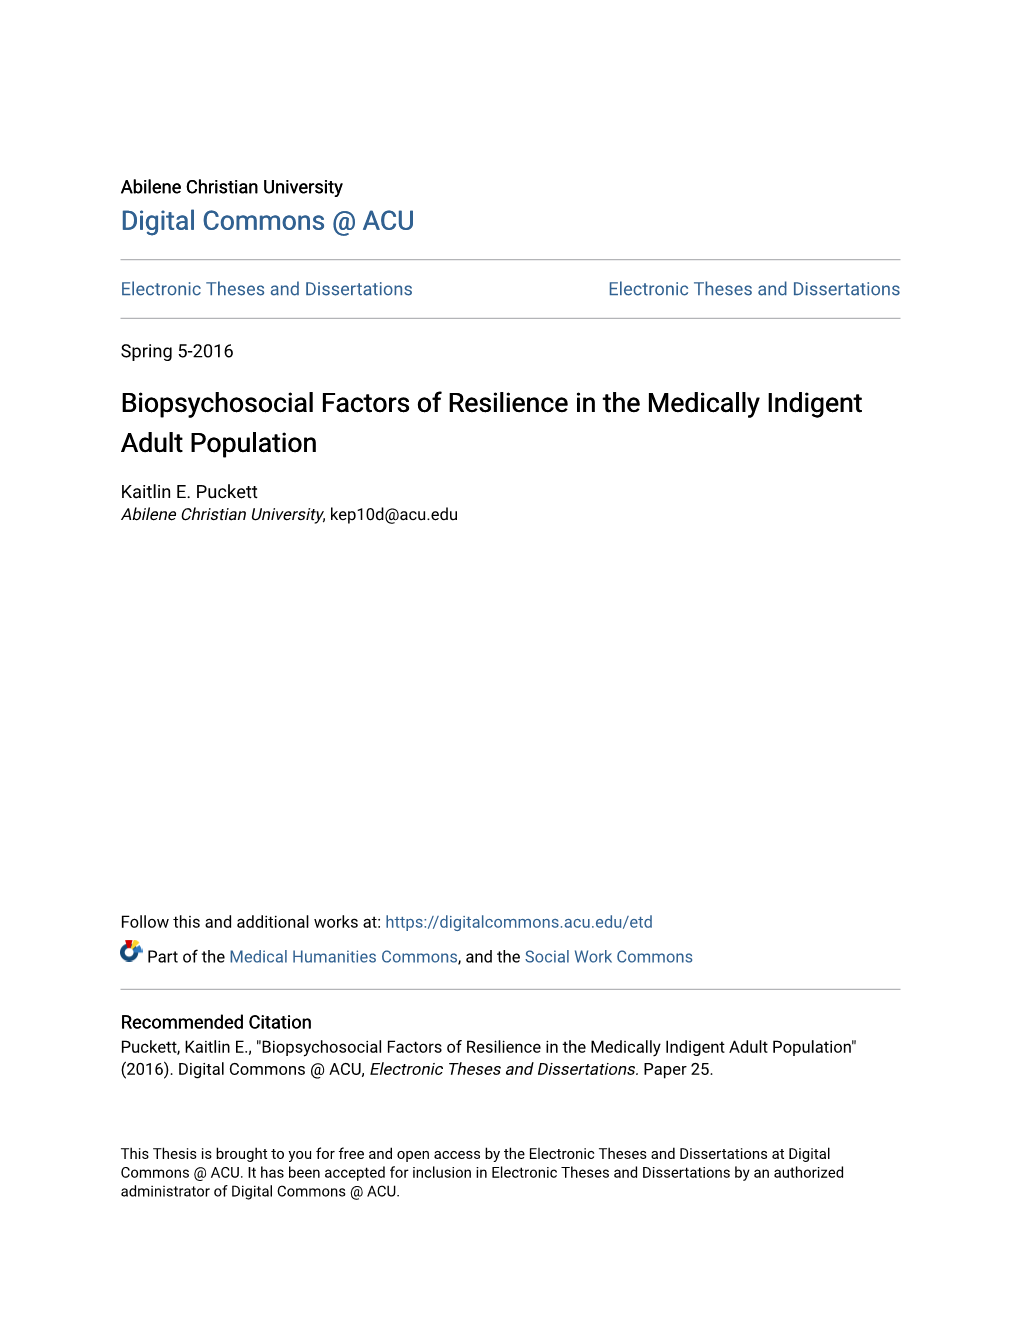 Biopsychosocial Factors of Resilience in the Medically Indigent Adult Population